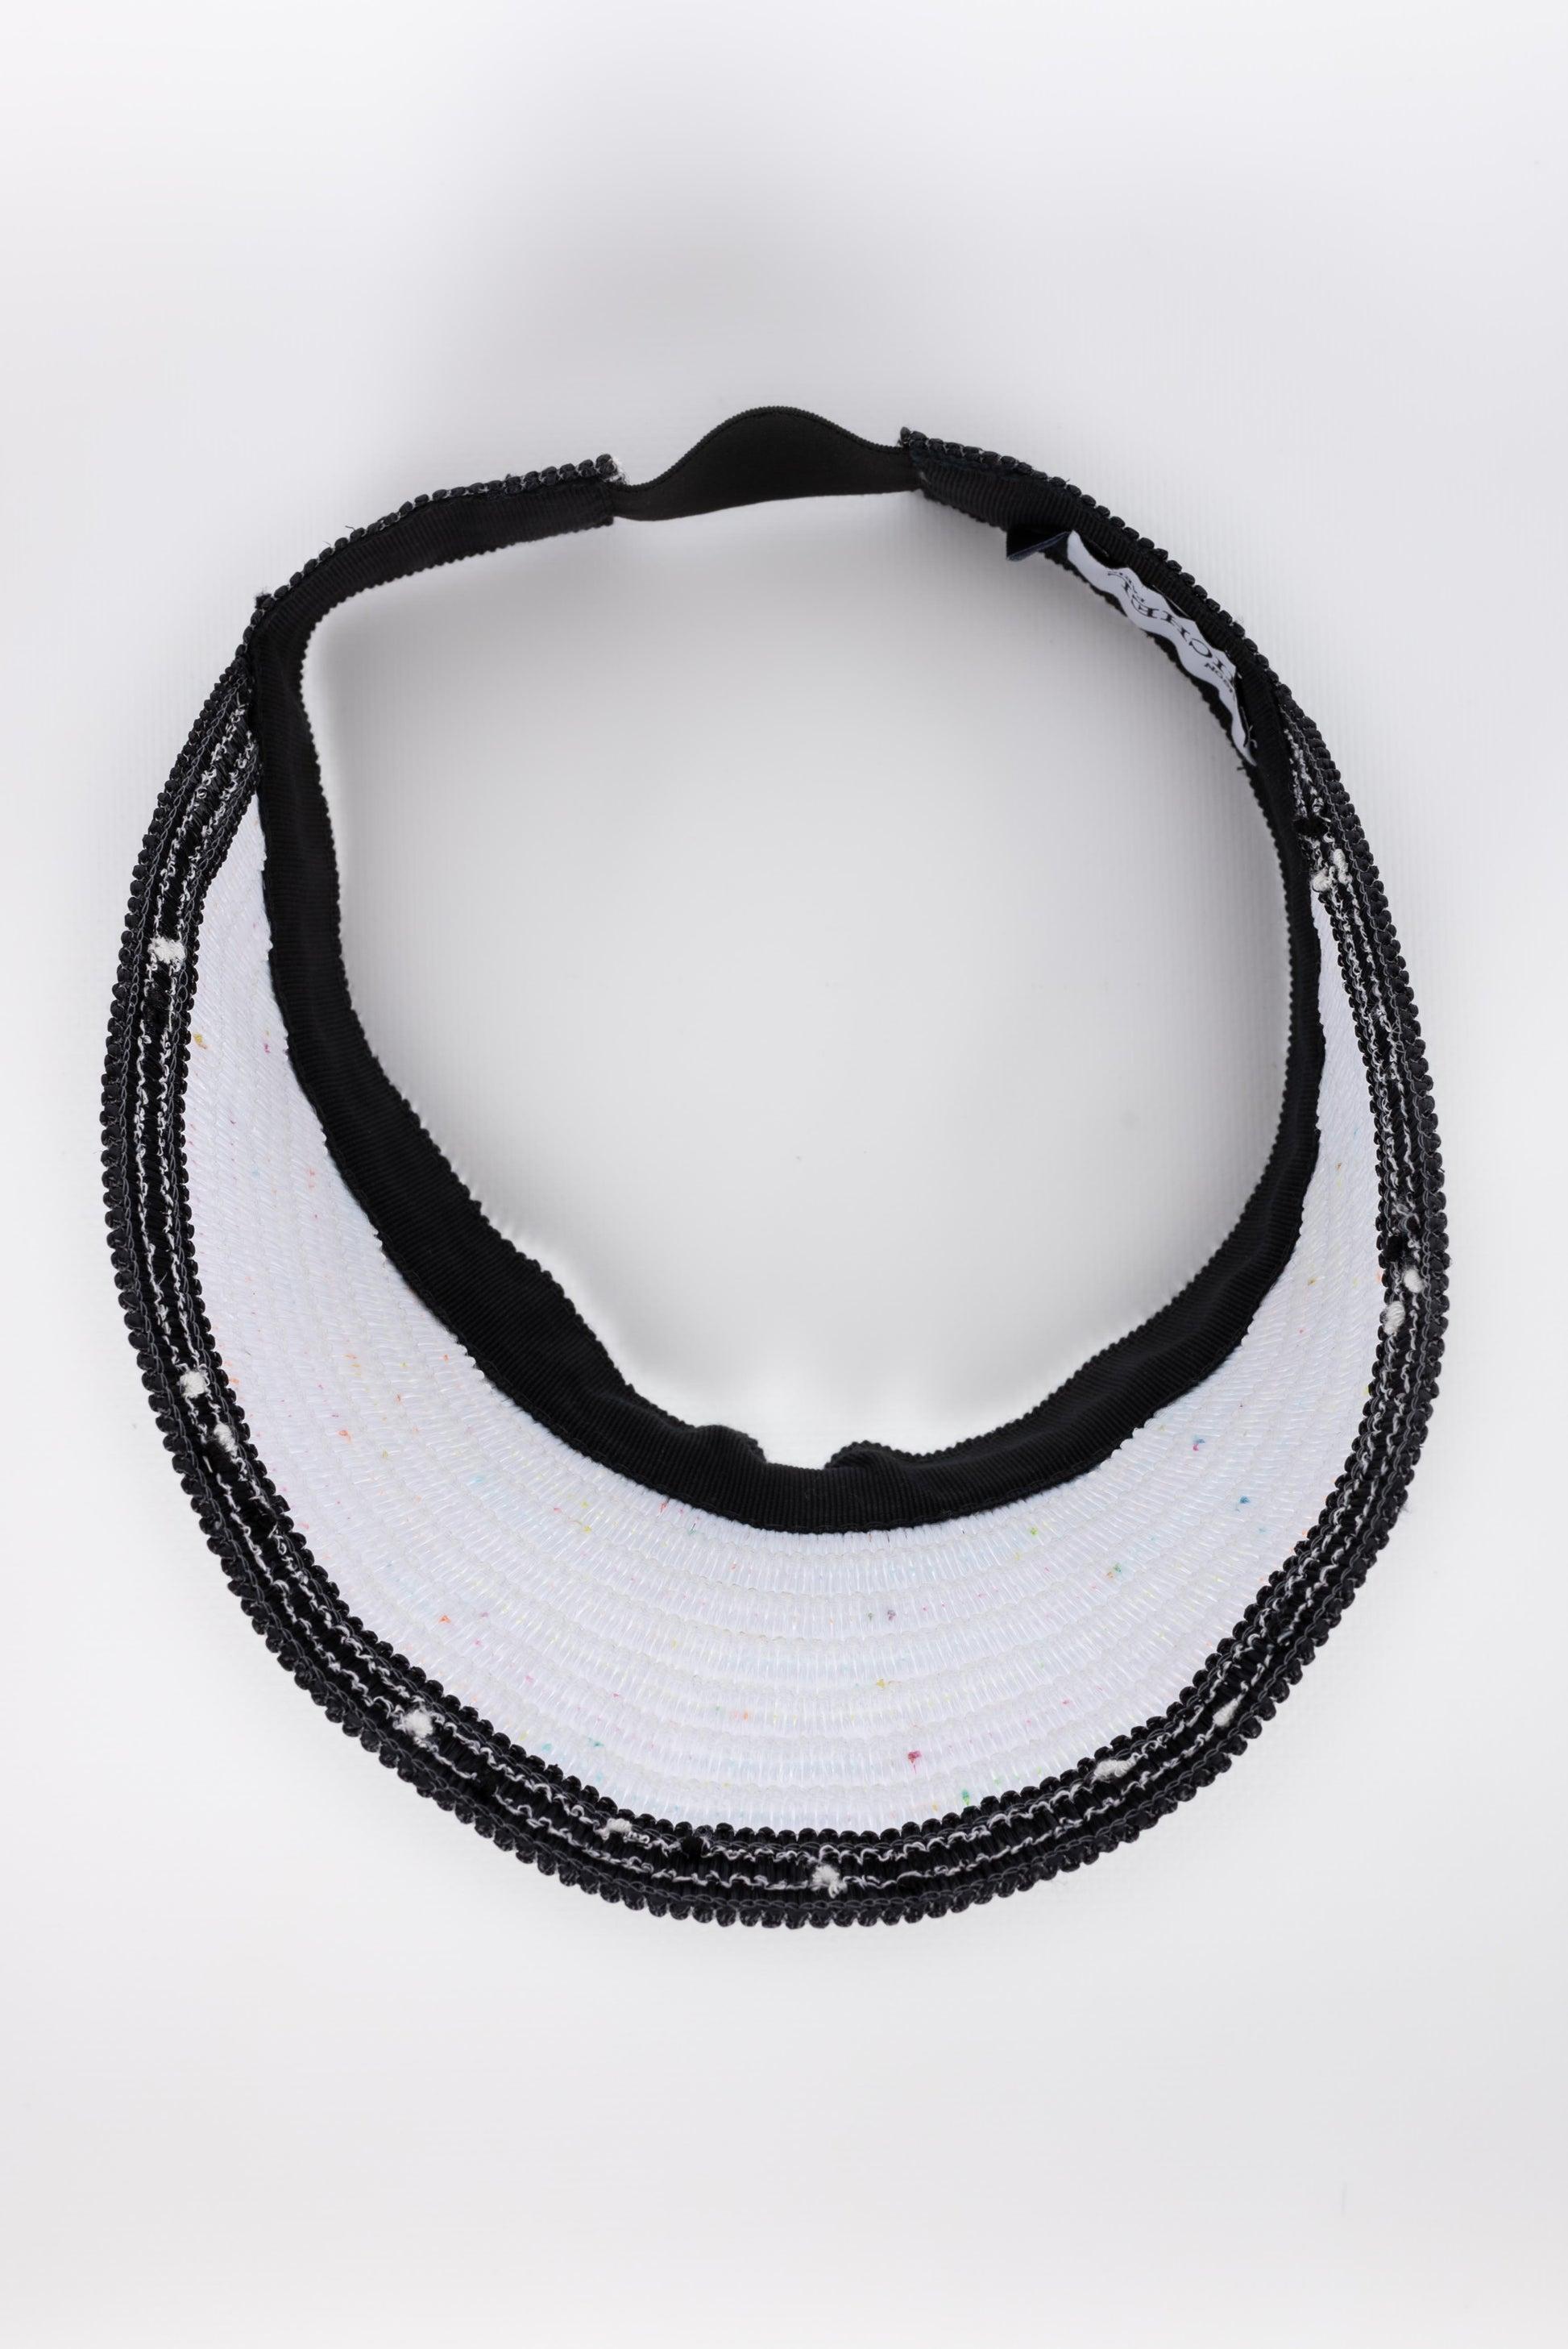 Maison Michel Eyeshade in Black and White Raffia Hat For Sale 3